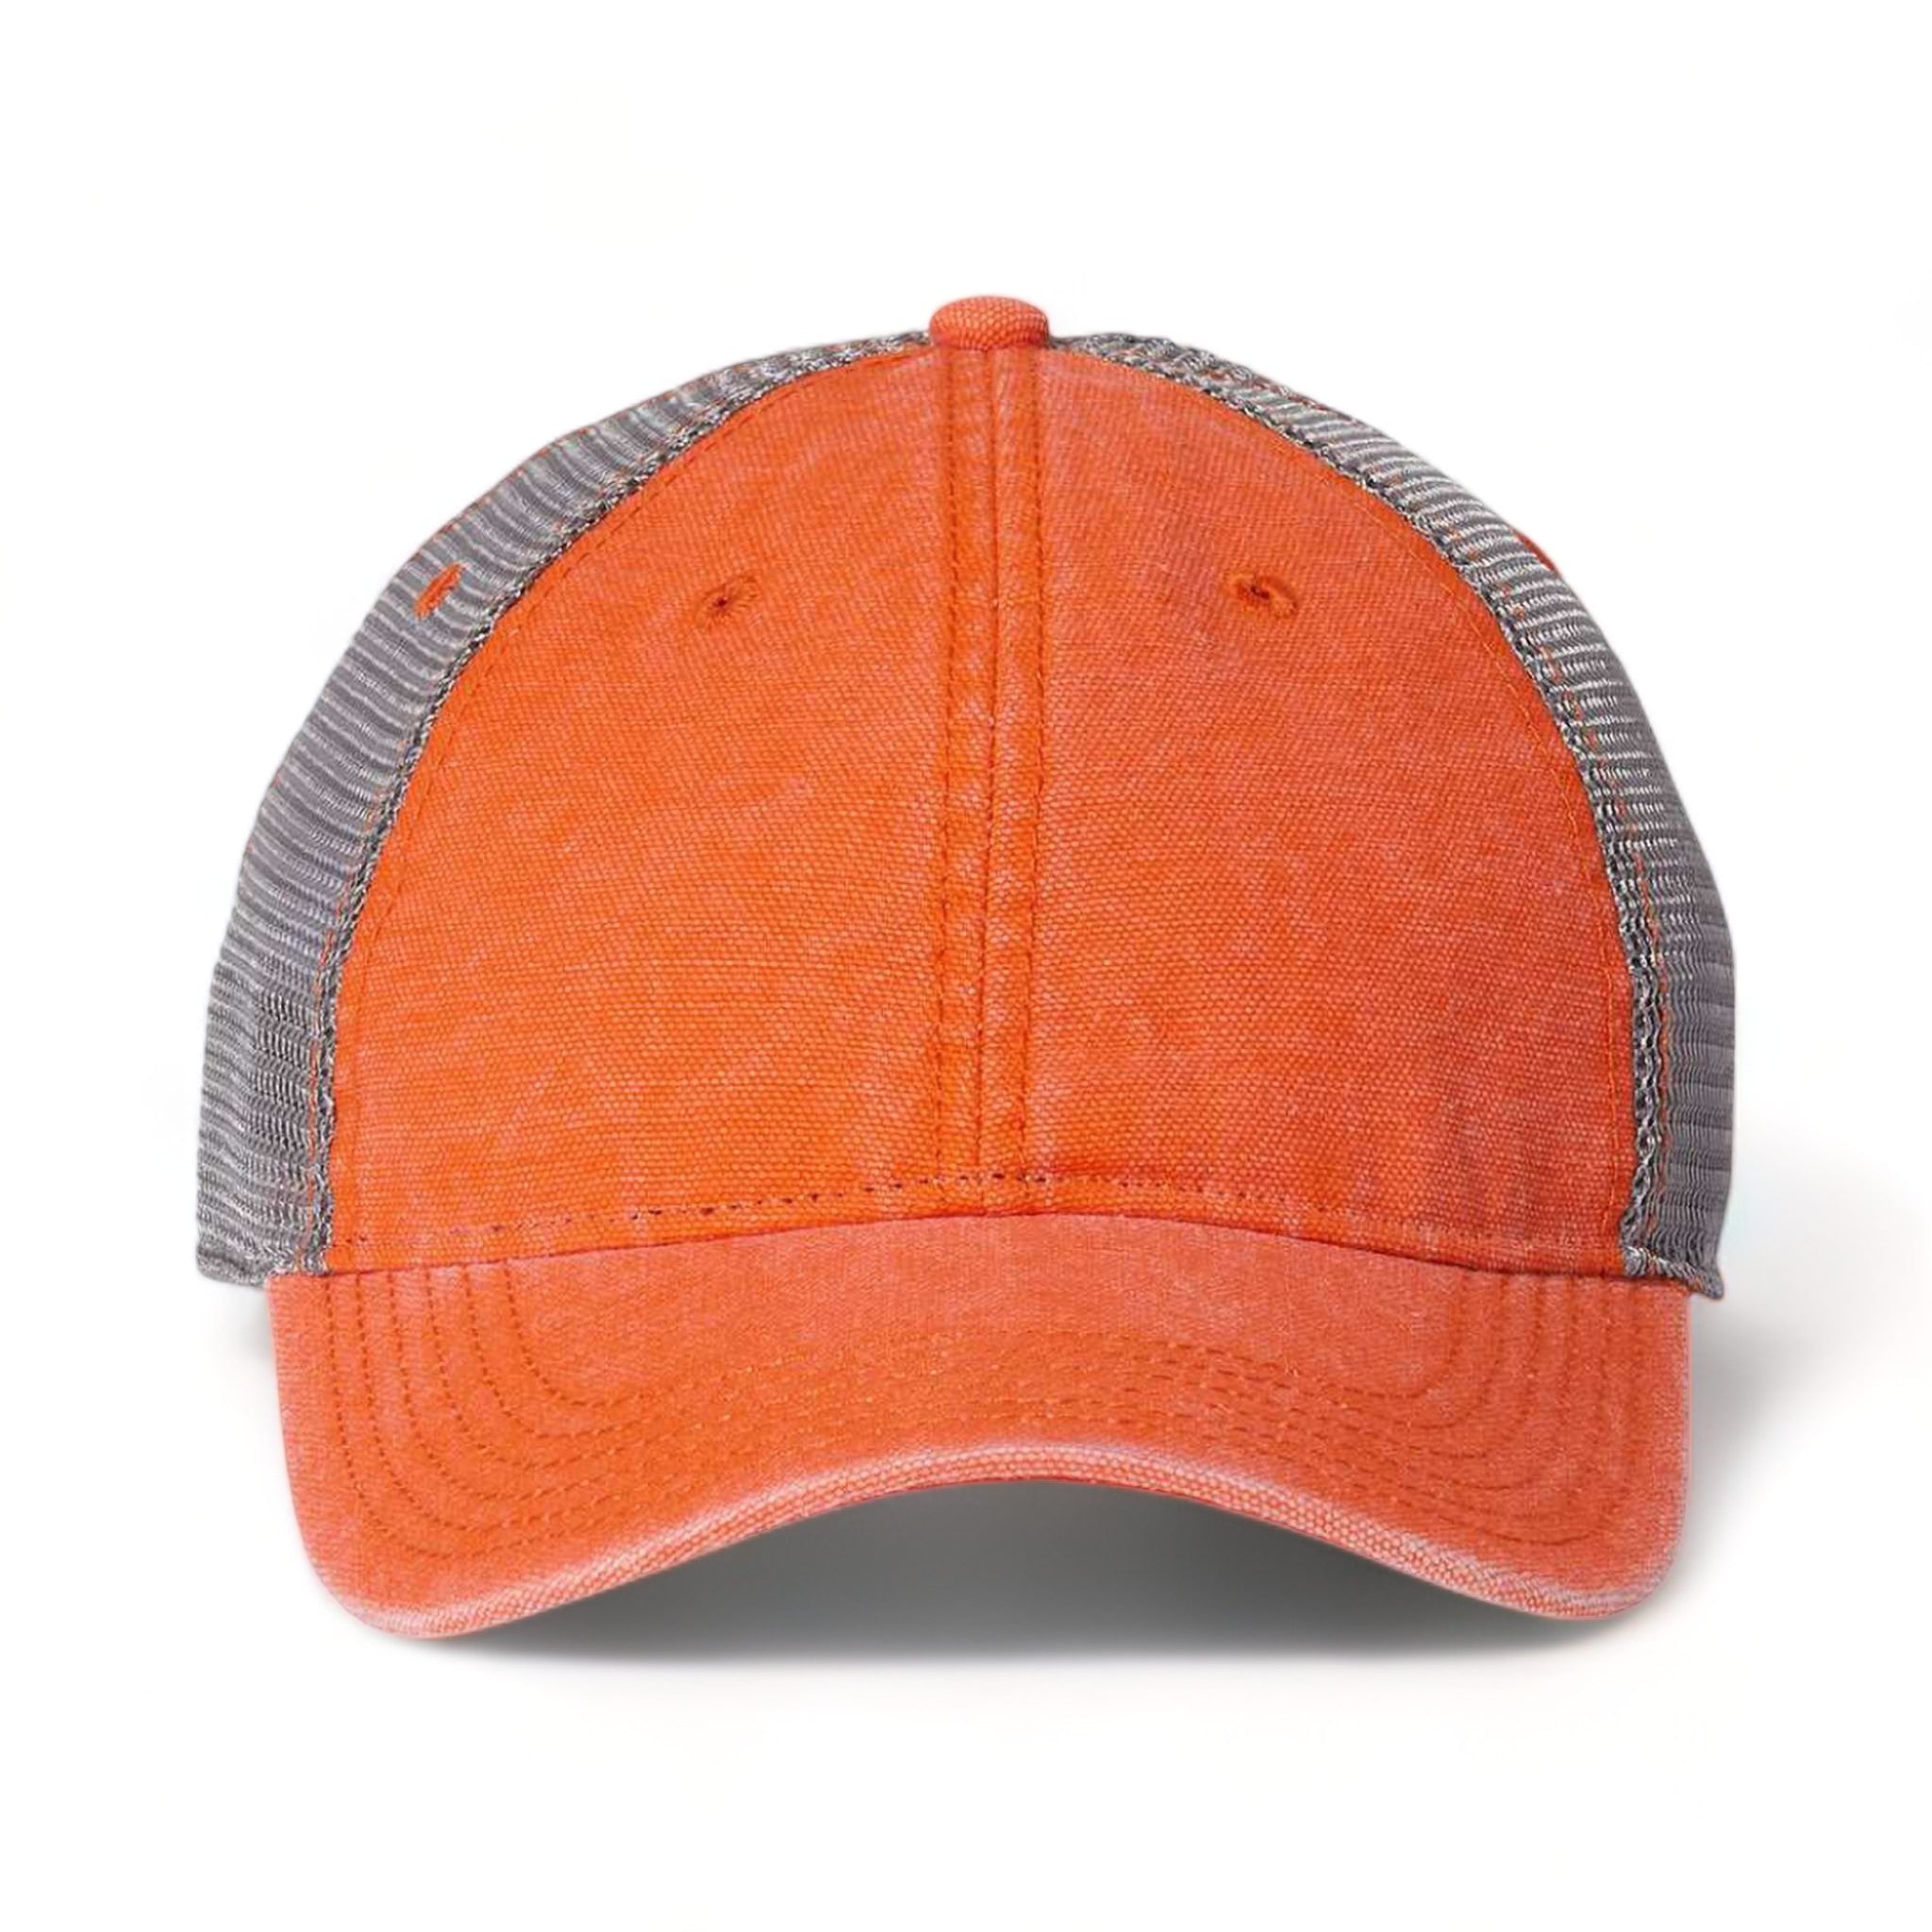 Front view of LEGACY DTA custom hat in orange and grey